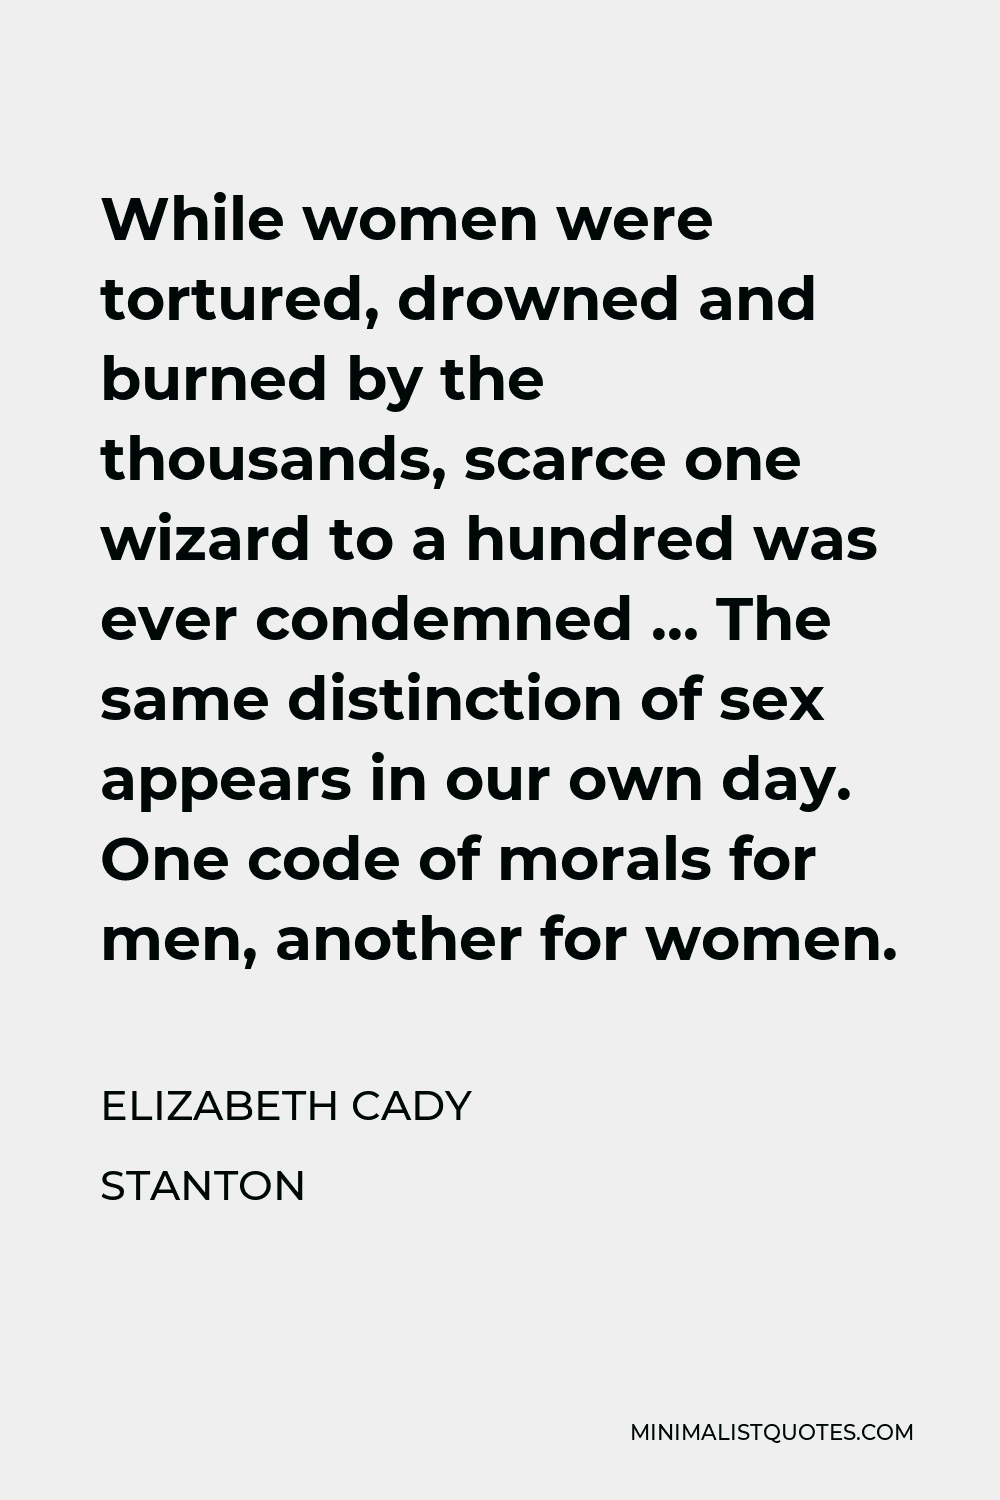 Elizabeth Cady Stanton Quote - While women were tortured, drowned and burned by the thousands, scarce one wizard to a hundred was ever condemned … The same distinction of sex appears in our own day. One code of morals for men, another for women.